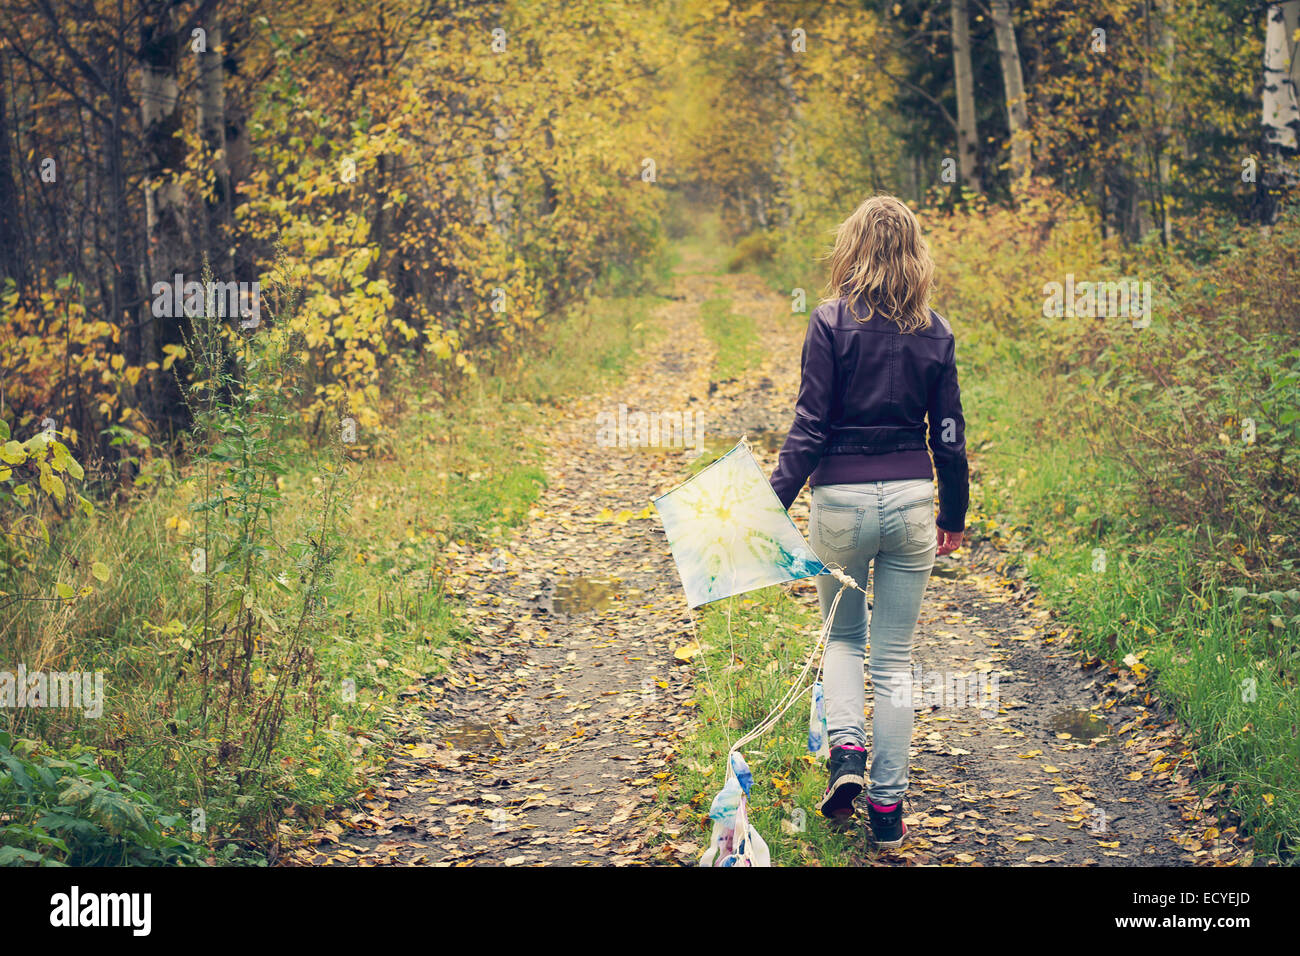 Woman carrying kite on dirt path Stock Photo